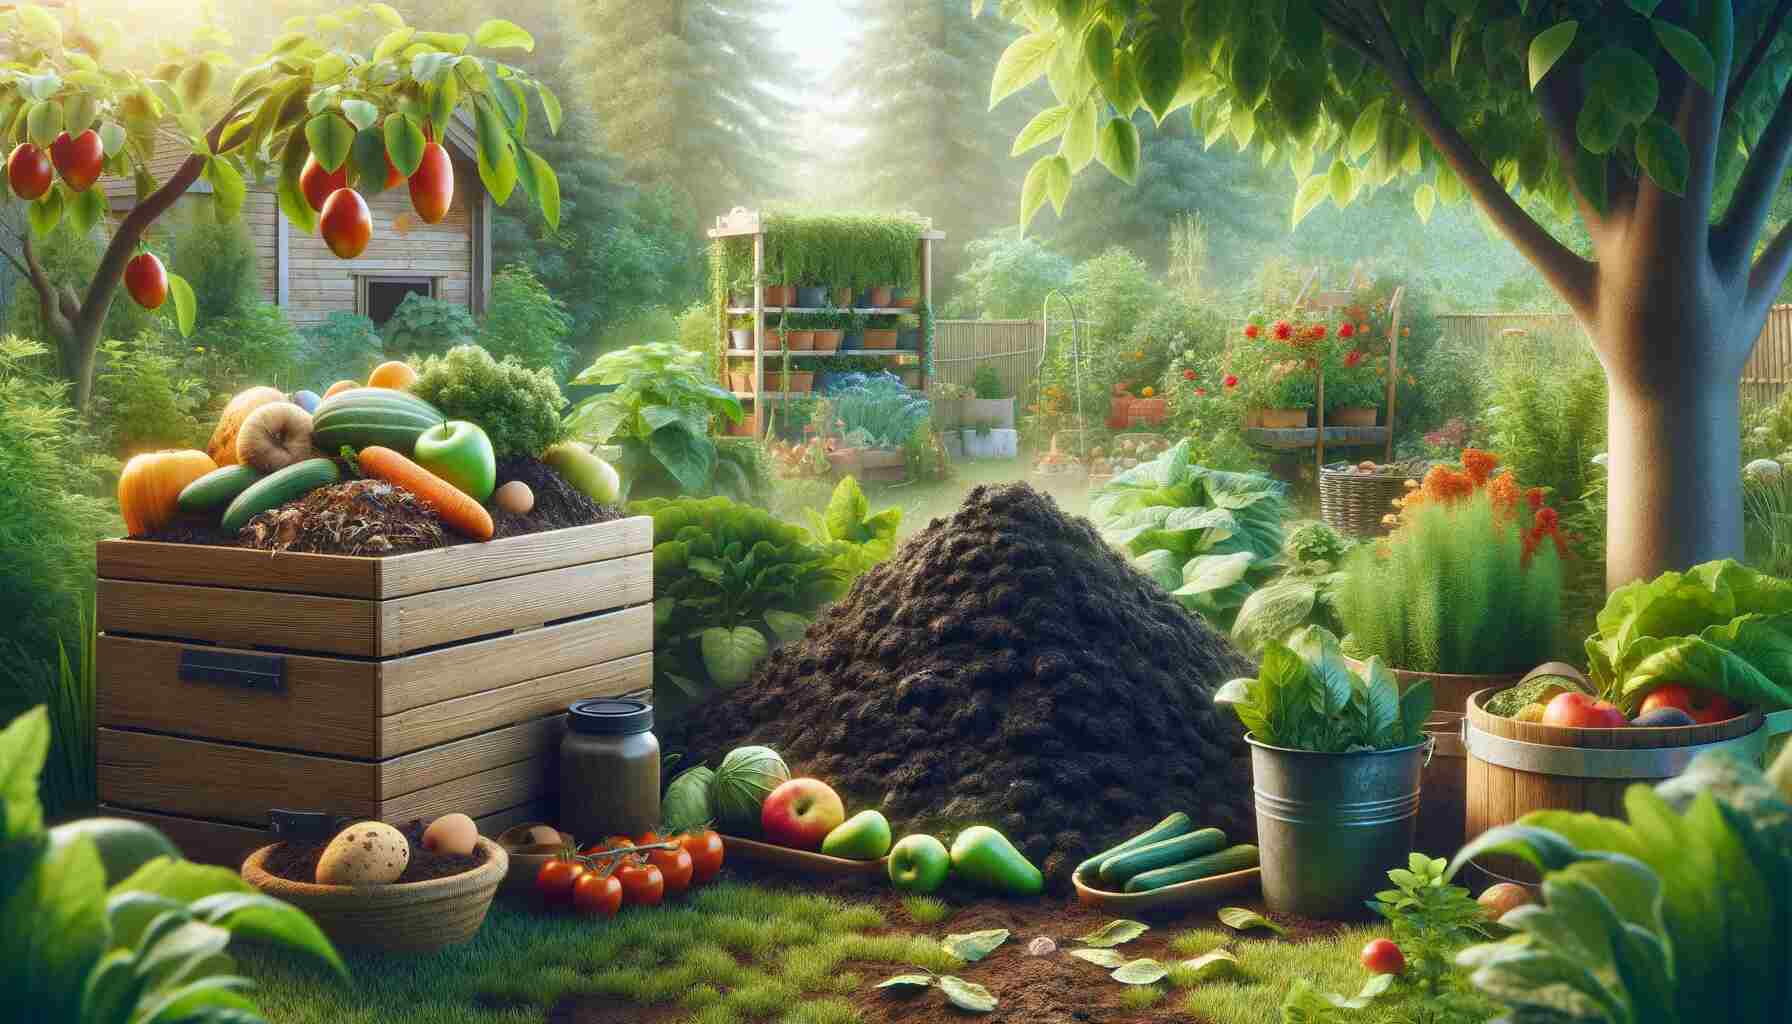 What Is Compost Used For? Exploring the Benefits and Applications of Composting